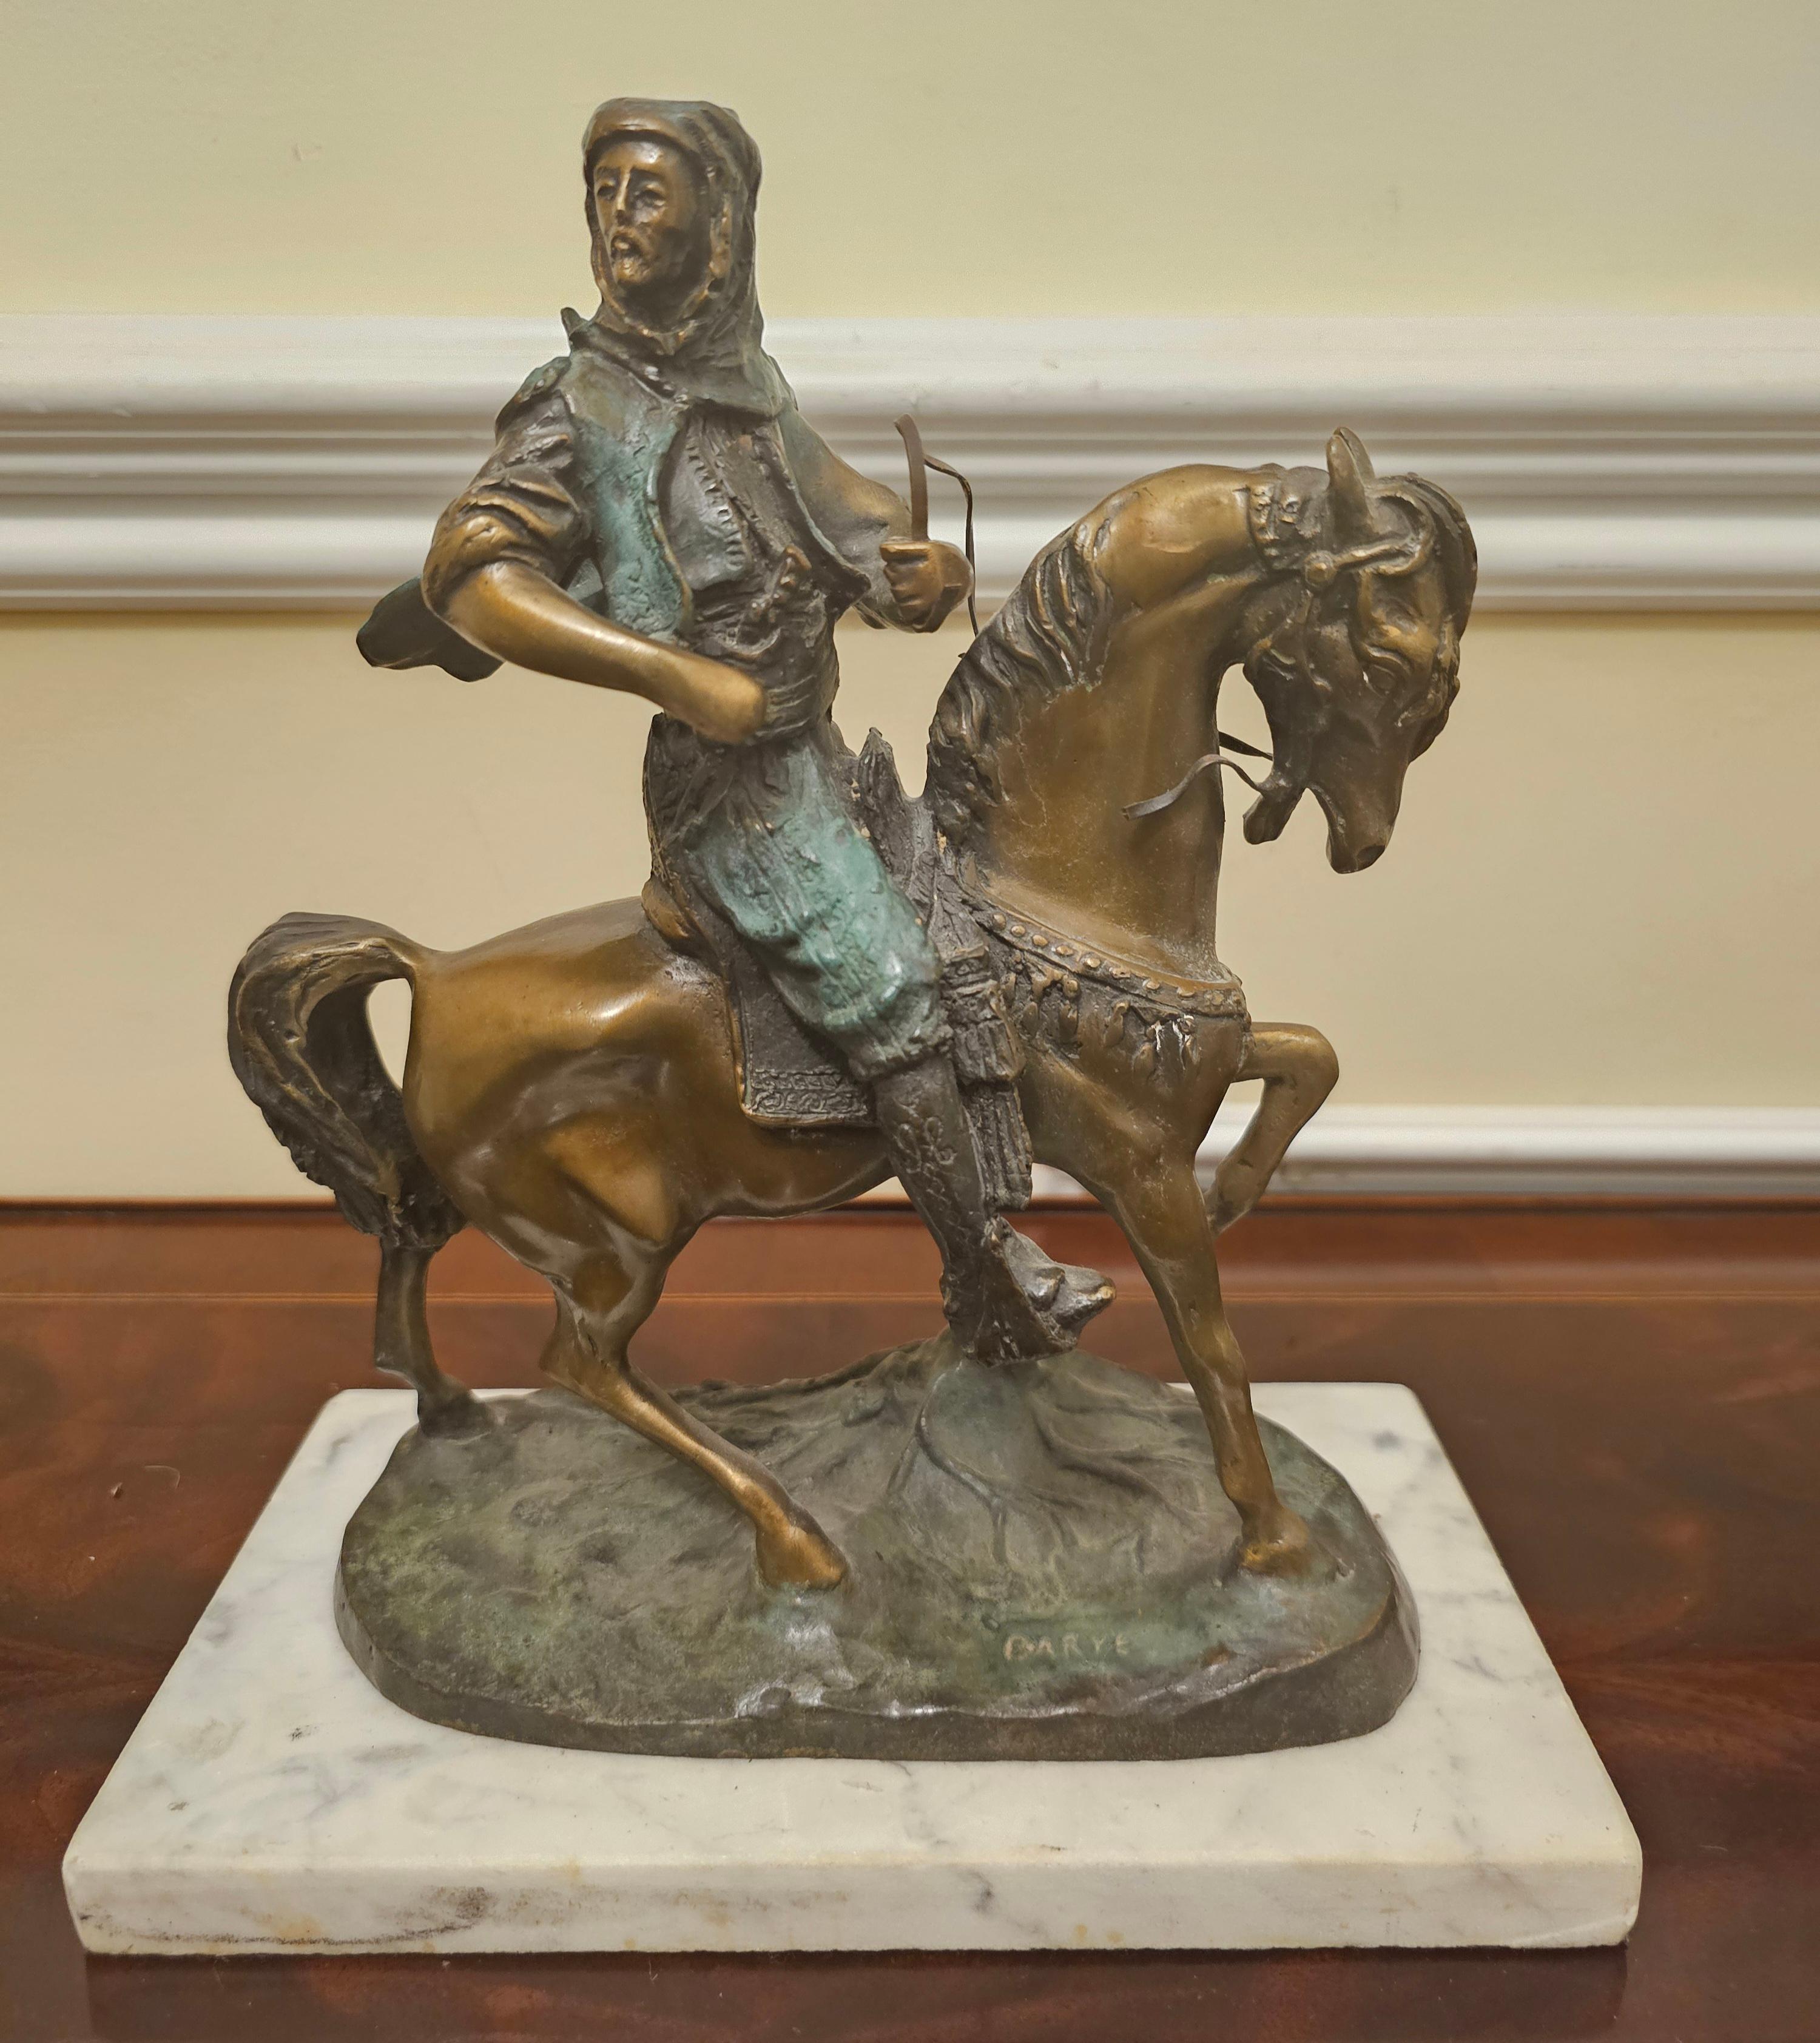 A Late 19th french verdigris bronze group of Arab Hunter on Horseback. Cast from the model by Alfred Barye and Emile Guillemin, Late 19th Century, wearing elaborate costume and with his catch slung across the back of the horse, on a naturalistic